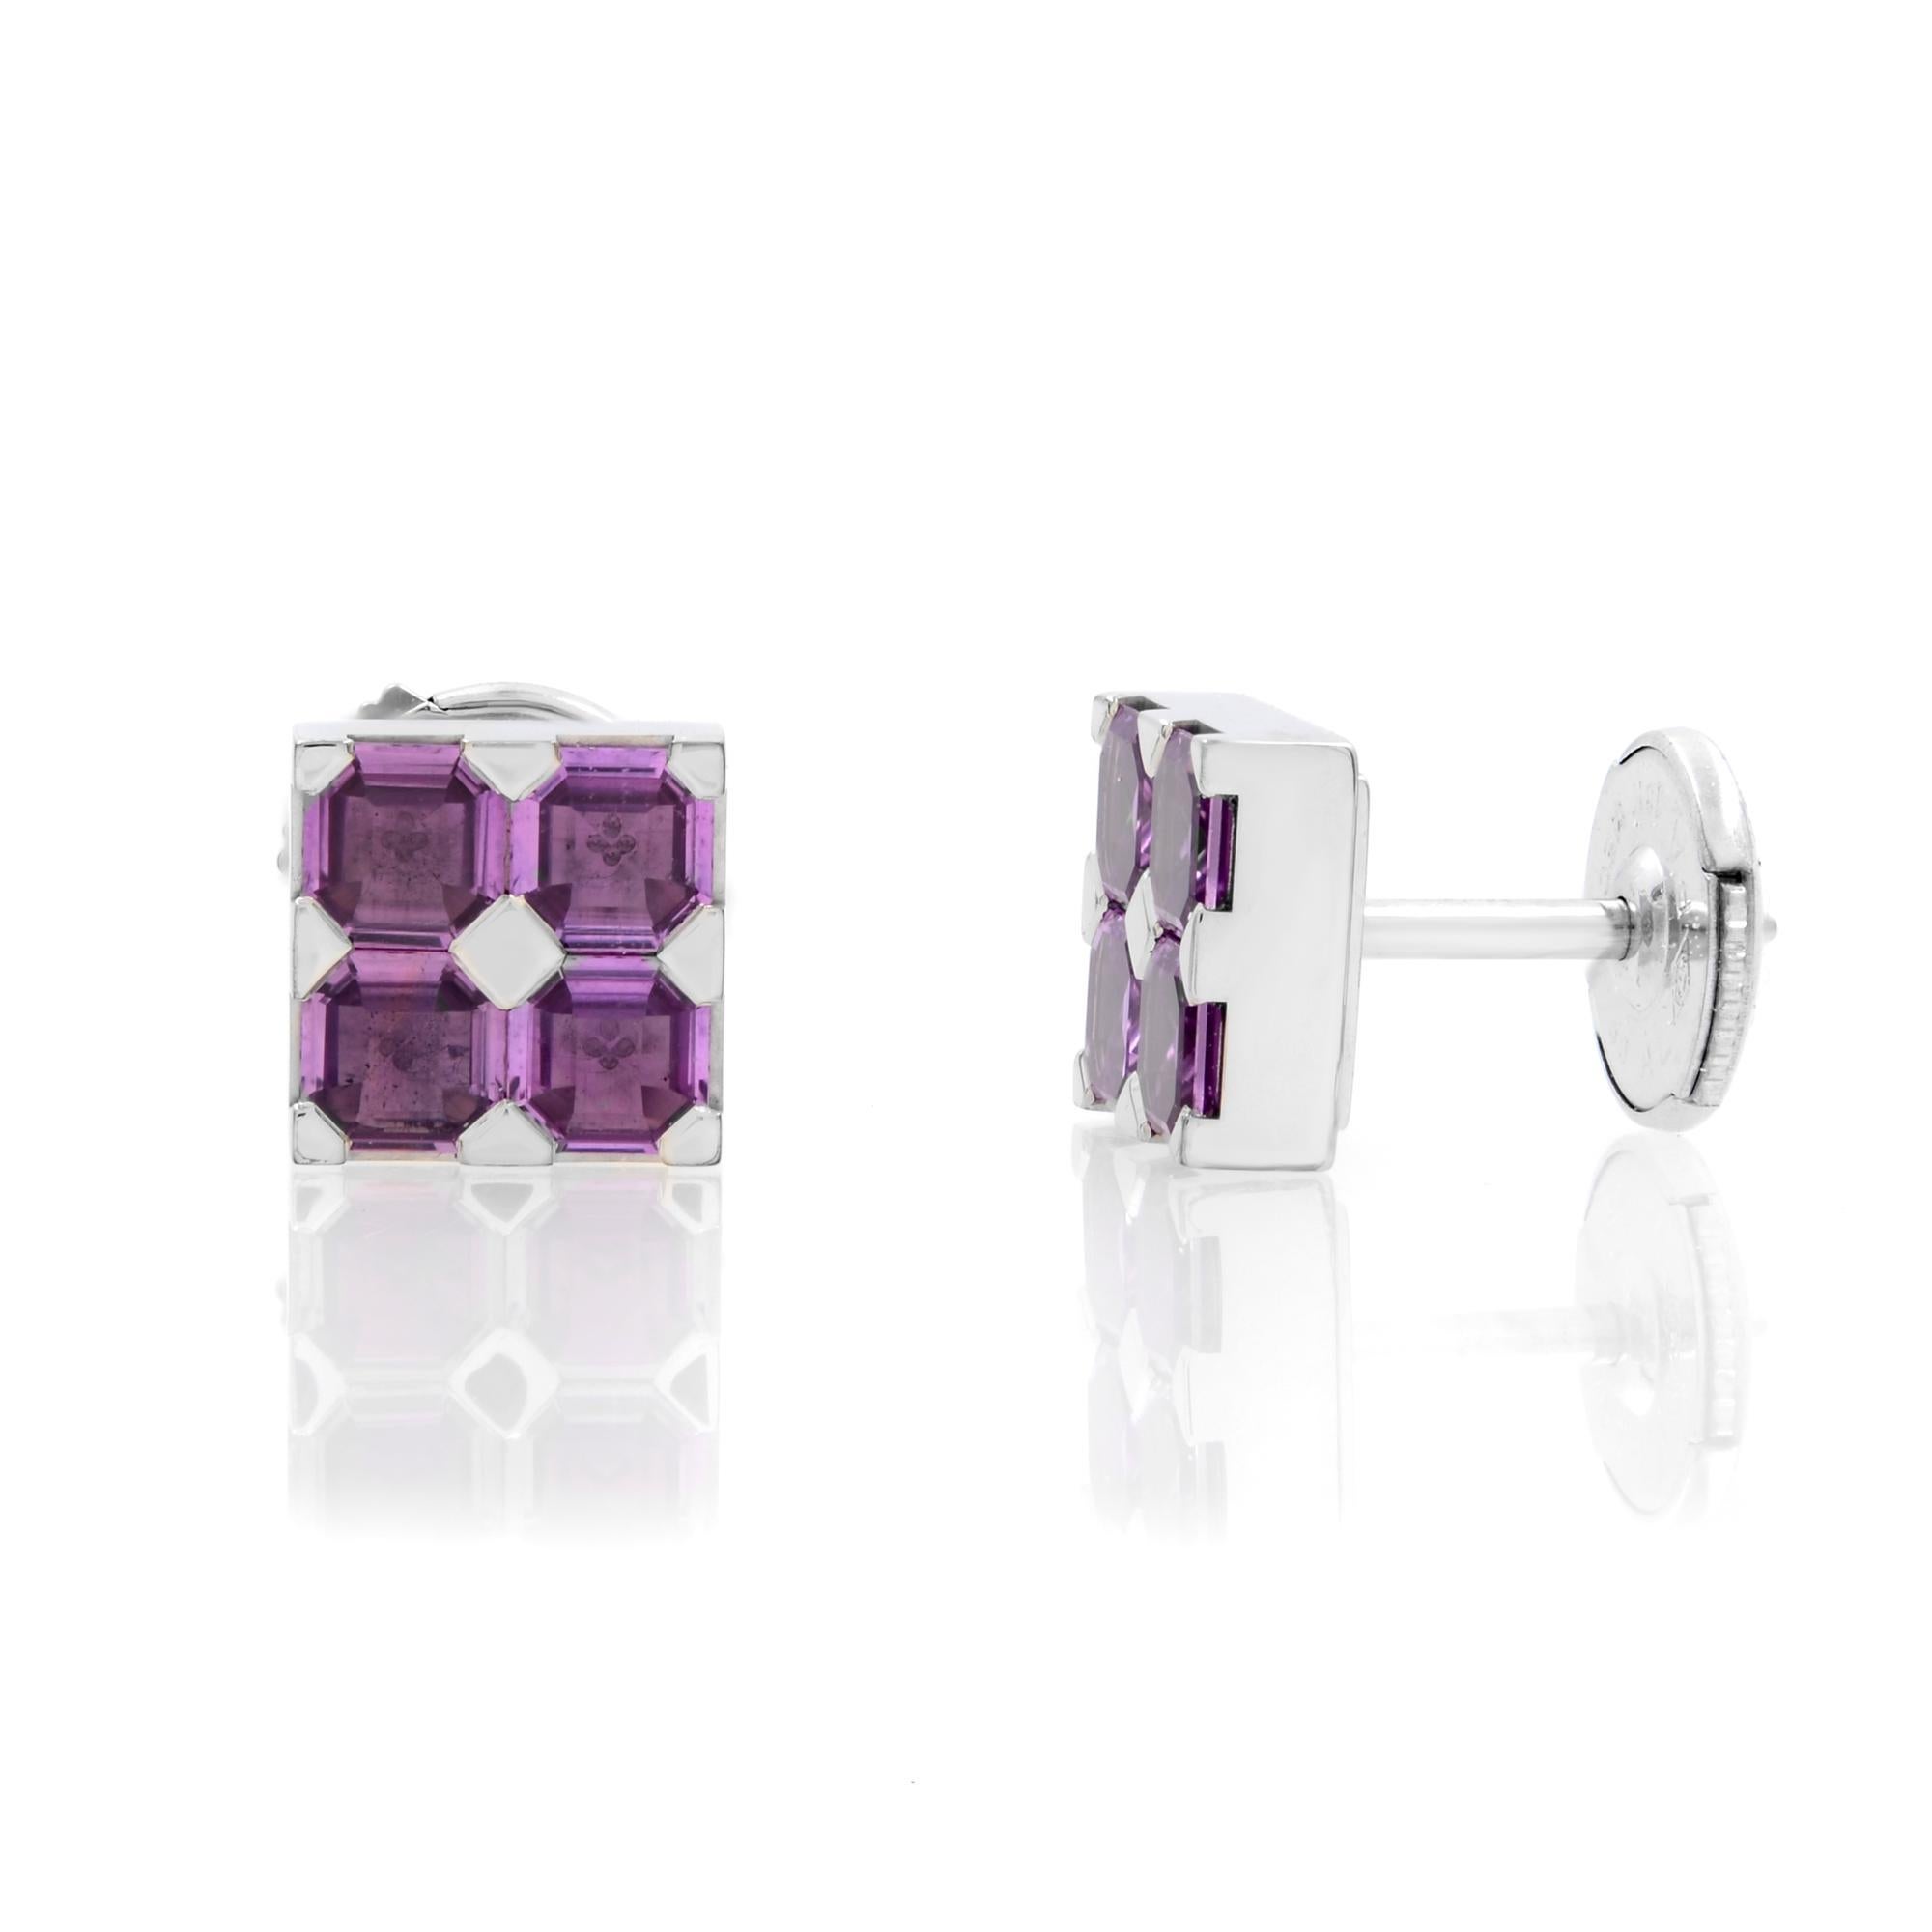 Beautiful Amethyst square shaped stud earrings by Chopard designed in 18K white gold. Earrings size: 7.4mm x 7.4mm. The earrings are equipped with secure push backs. Weight: 4.7 grams. Comes with original box and papers.